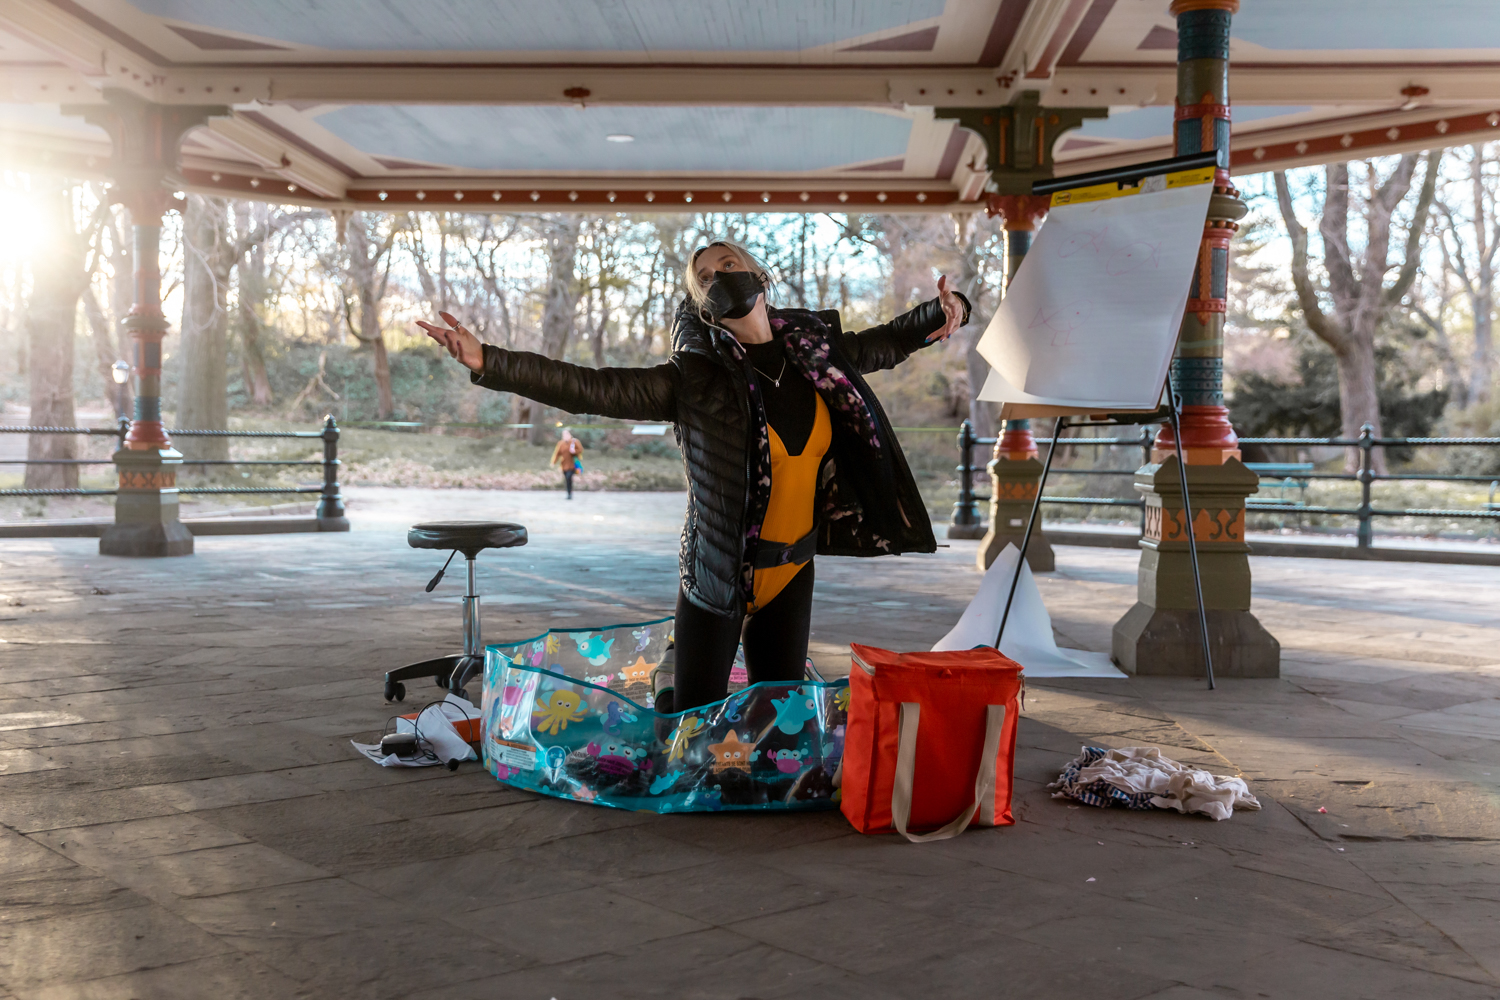 An adult, wearing an orange leotard over a black unitard and black puffy coat, kneels in an empty baby pool. Their upturned face is partially covered with a black surgical mask and their arms are outstretch on either side of their body. They are surrounded by various objects such as a stool and easel.